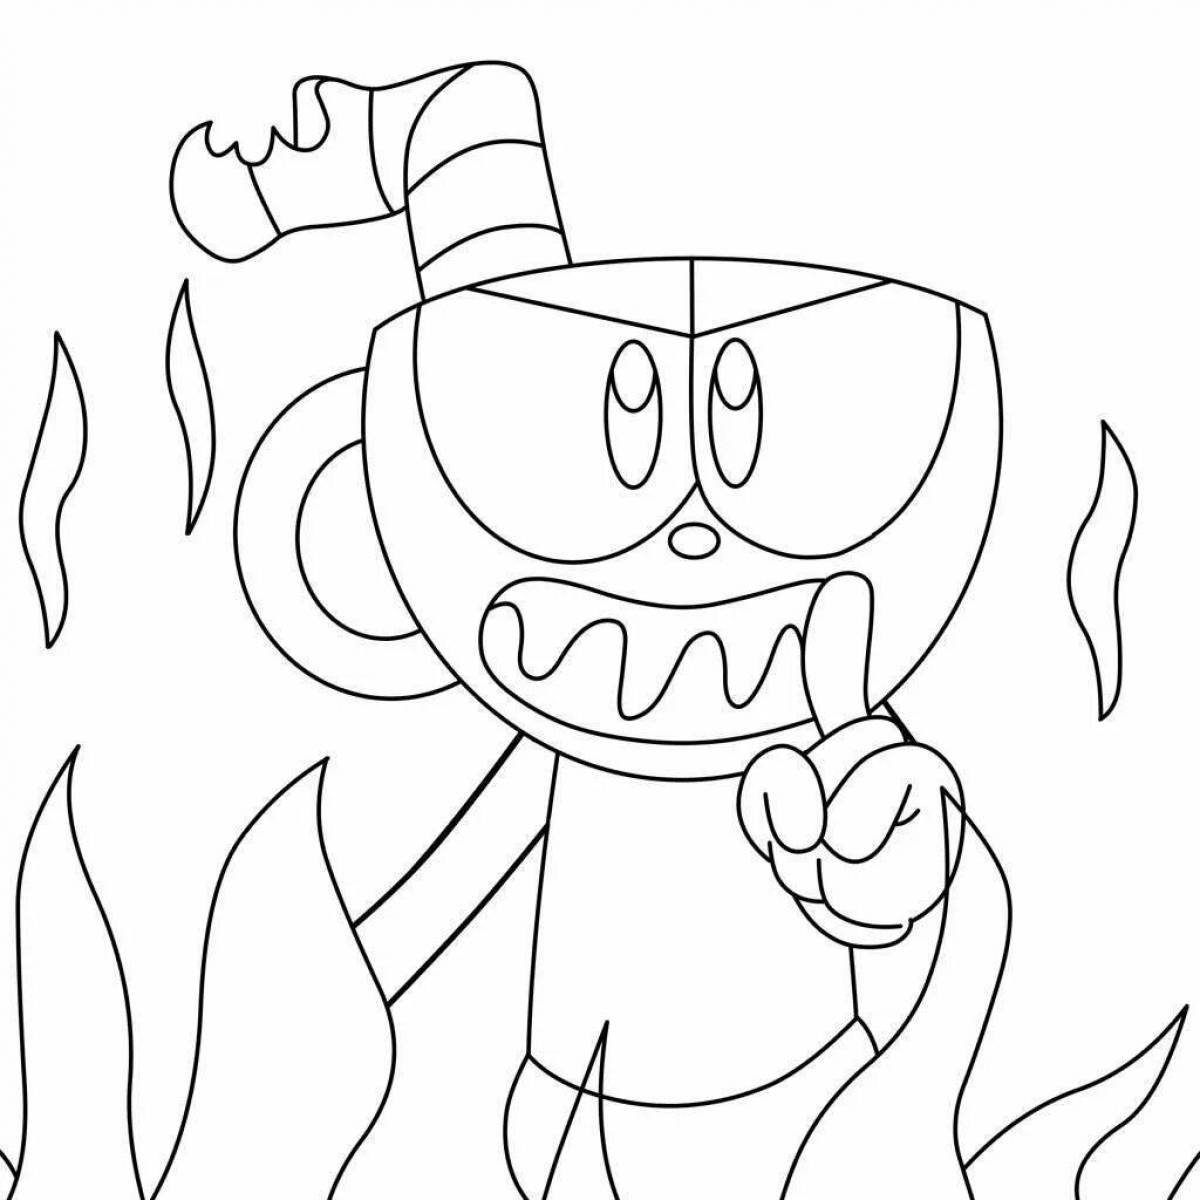 Coloring page attractive cuphead bosses